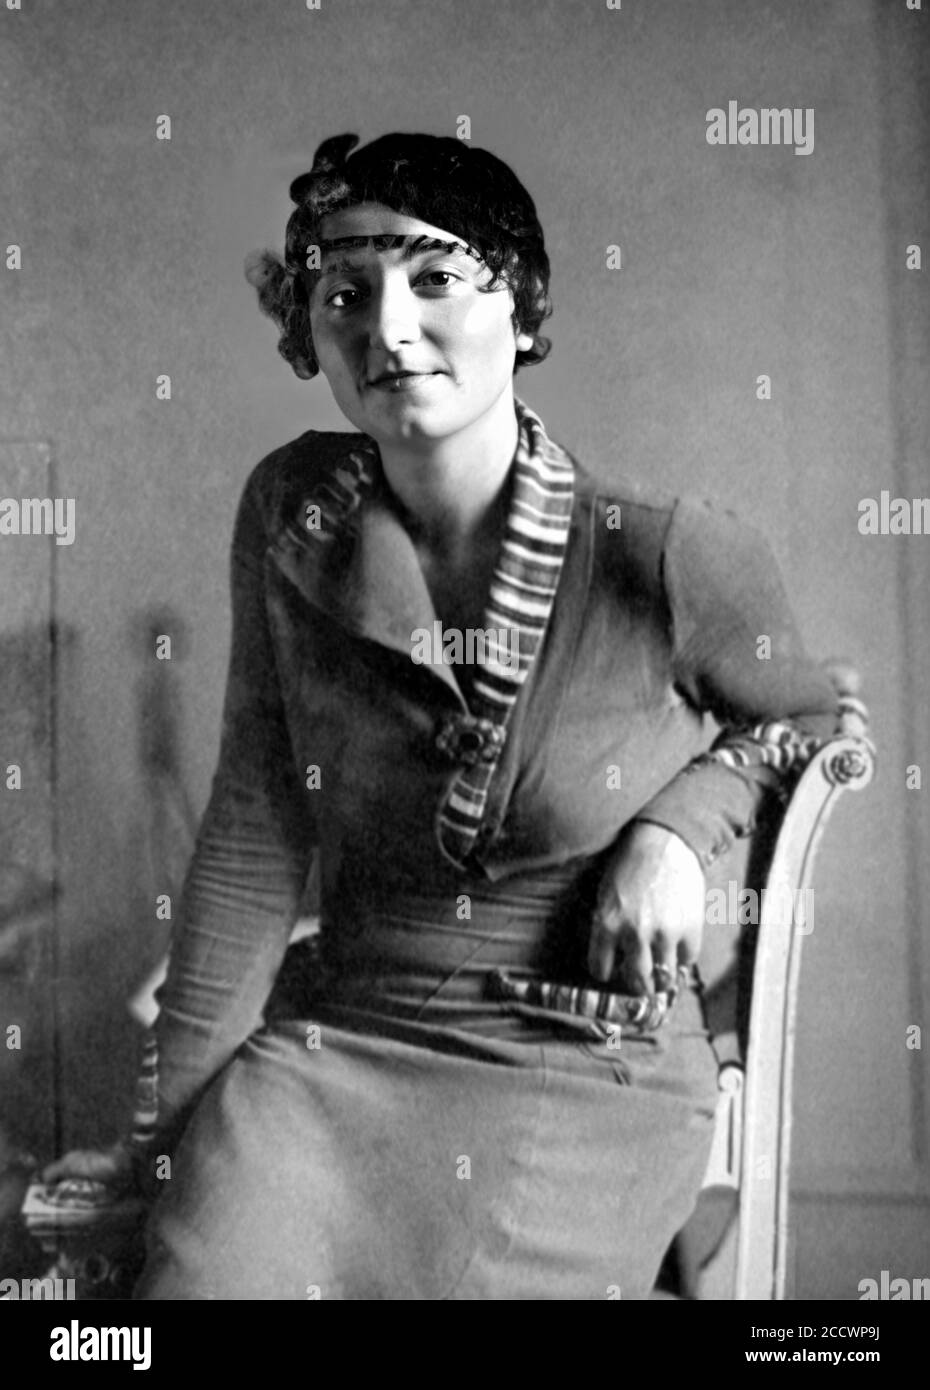 1932 c., ITALY  : The italian woman aviator  GABRIELLA Gaby ANGELINI ( 1911 - 1932 ), pilot of airplane Breda Ba. 15 . Portrait by unknown photographer . She was the first Italian woman to complete a trans-European flight, travelling to eight European countries, for which she received a Golden Eagle Medal. In 1932 she left Italy on a solo flight to Delhi, India . Angelini encountered difficulties during a sandstorm in Libya , during the Raid Asiatico Milano-Delhi , and crashed in the desert and died. - PIONIERE DELL' ARIA - PIONIERI DEL VOLO - FLY - PIONIERS - AVIATRICE - AVIAZIONE - cappello Stock Photo